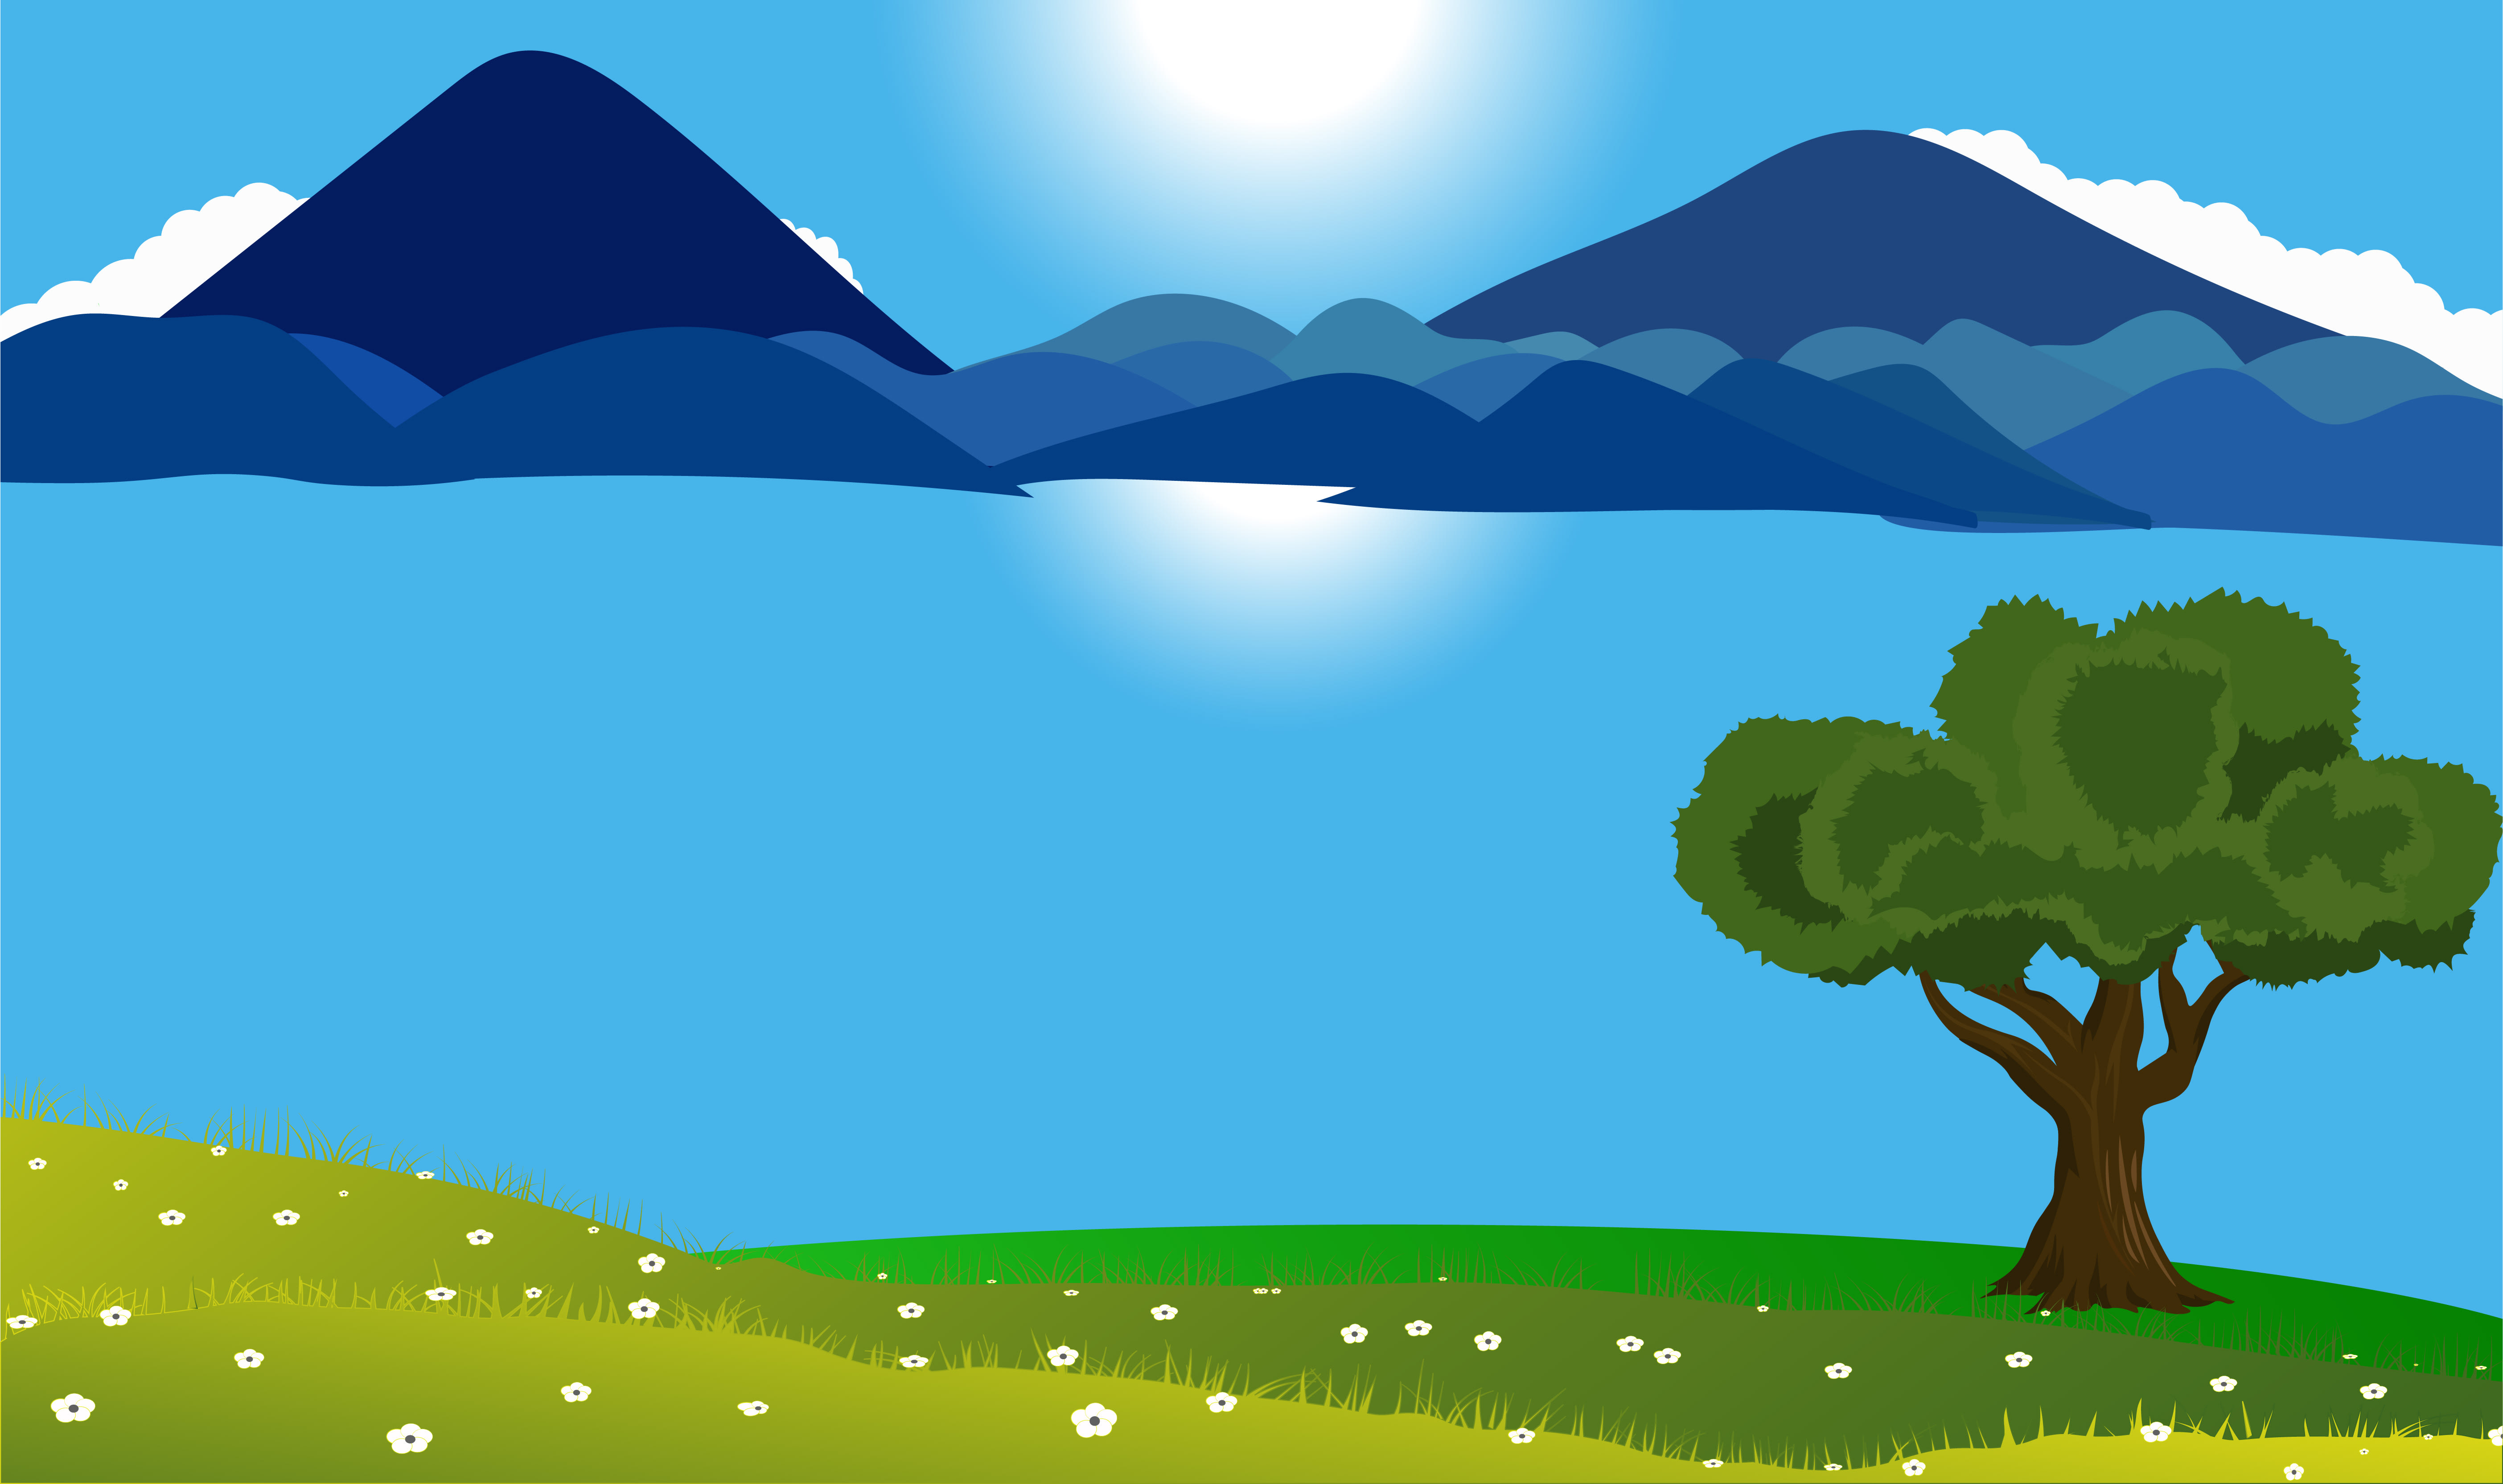 Natural scenery pictures for drawing - sidehety